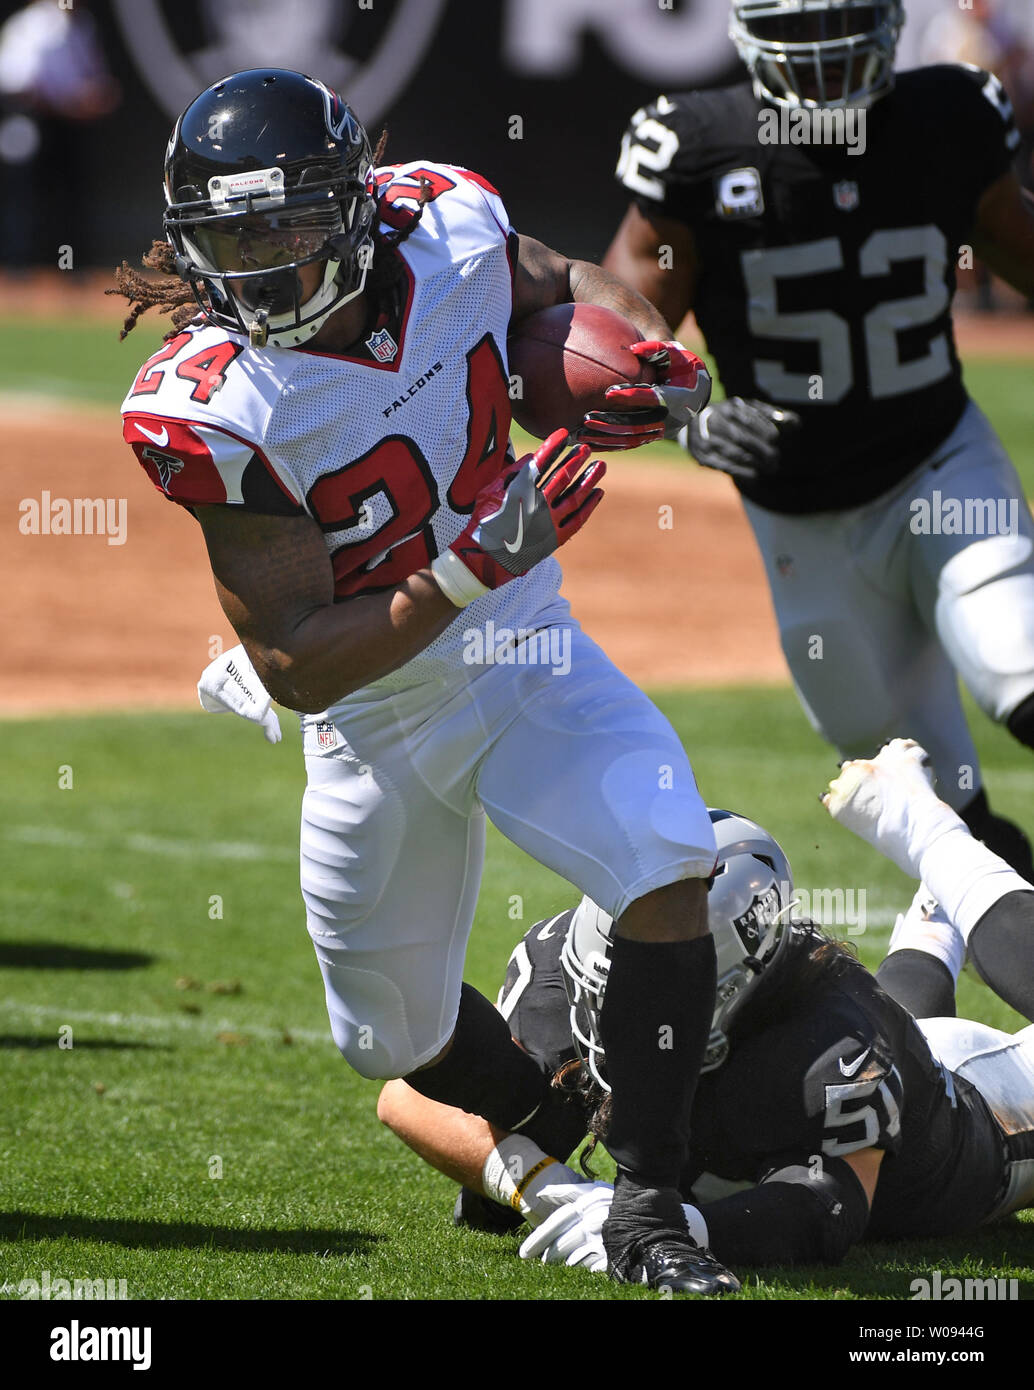 Atlanta Falcons RB Devonta Freeman (24) gets tripped up by Oakland Raiders Ben Heeney (50) in the first half at the Coliseum in Oakland, California on September 18, 2016. The Falcons defeated the Raiders 35-28.   Photo by Terry Schmitt/UPI Stock Photo